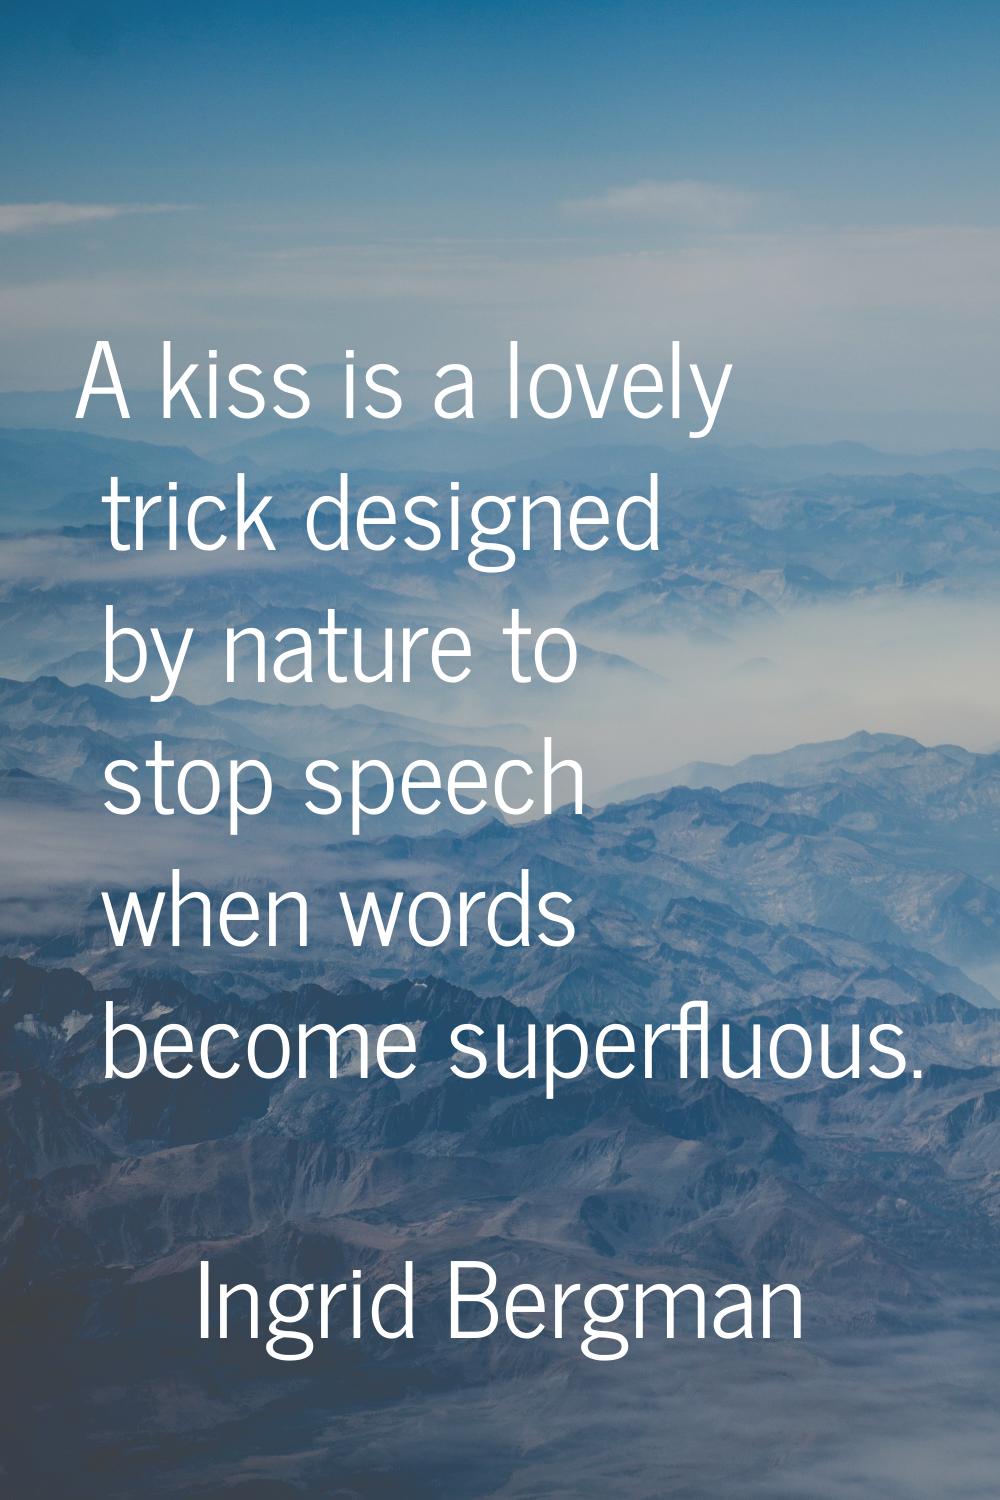 A kiss is a lovely trick designed by nature to stop speech when words become superfluous.